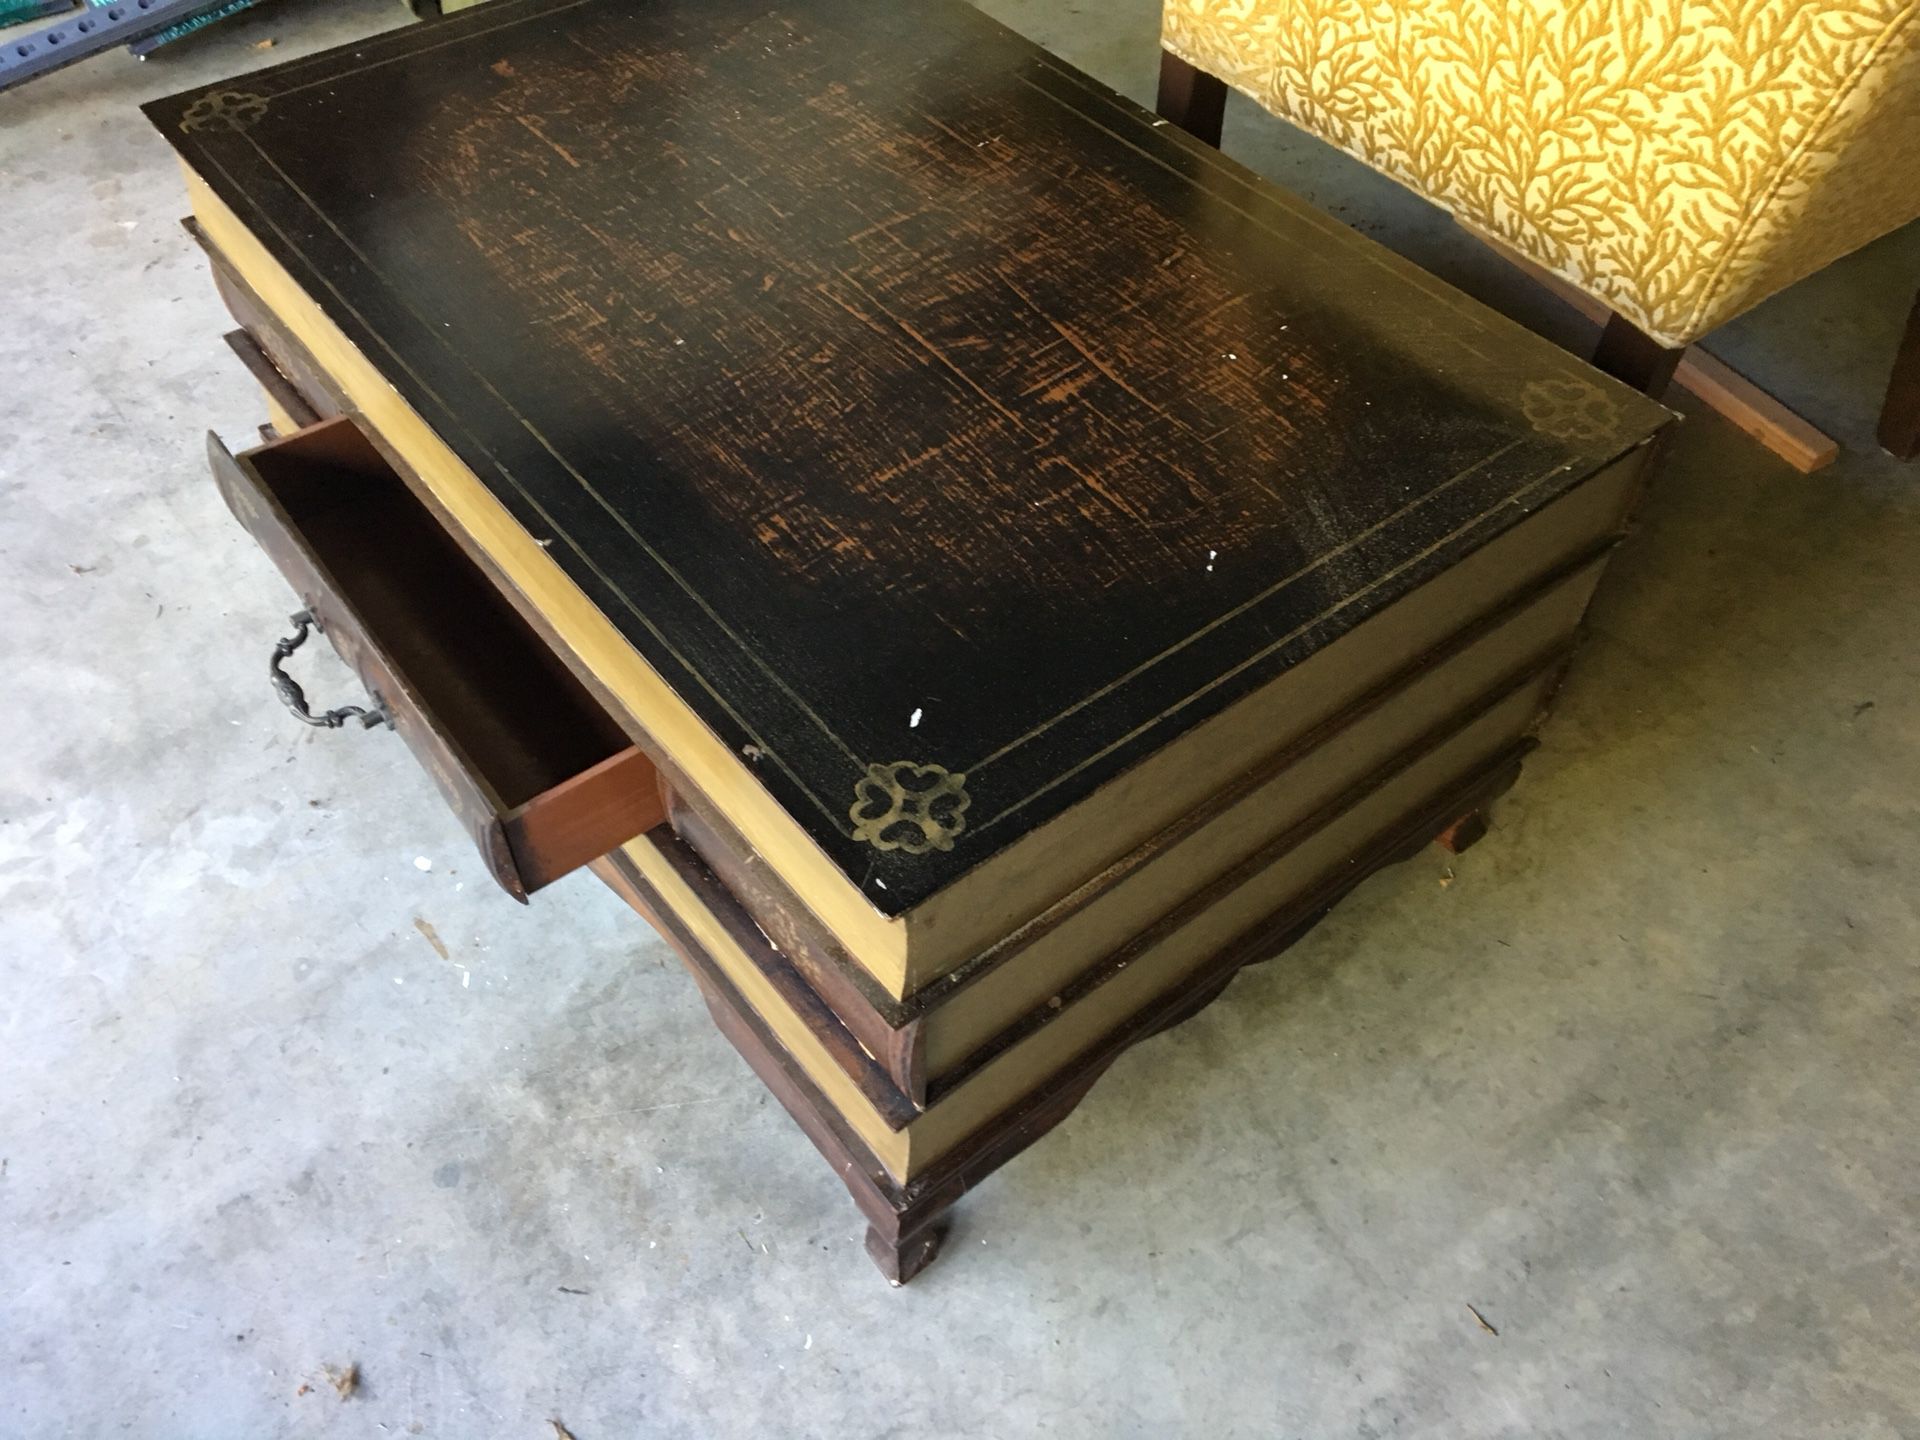 Funky book coffee table